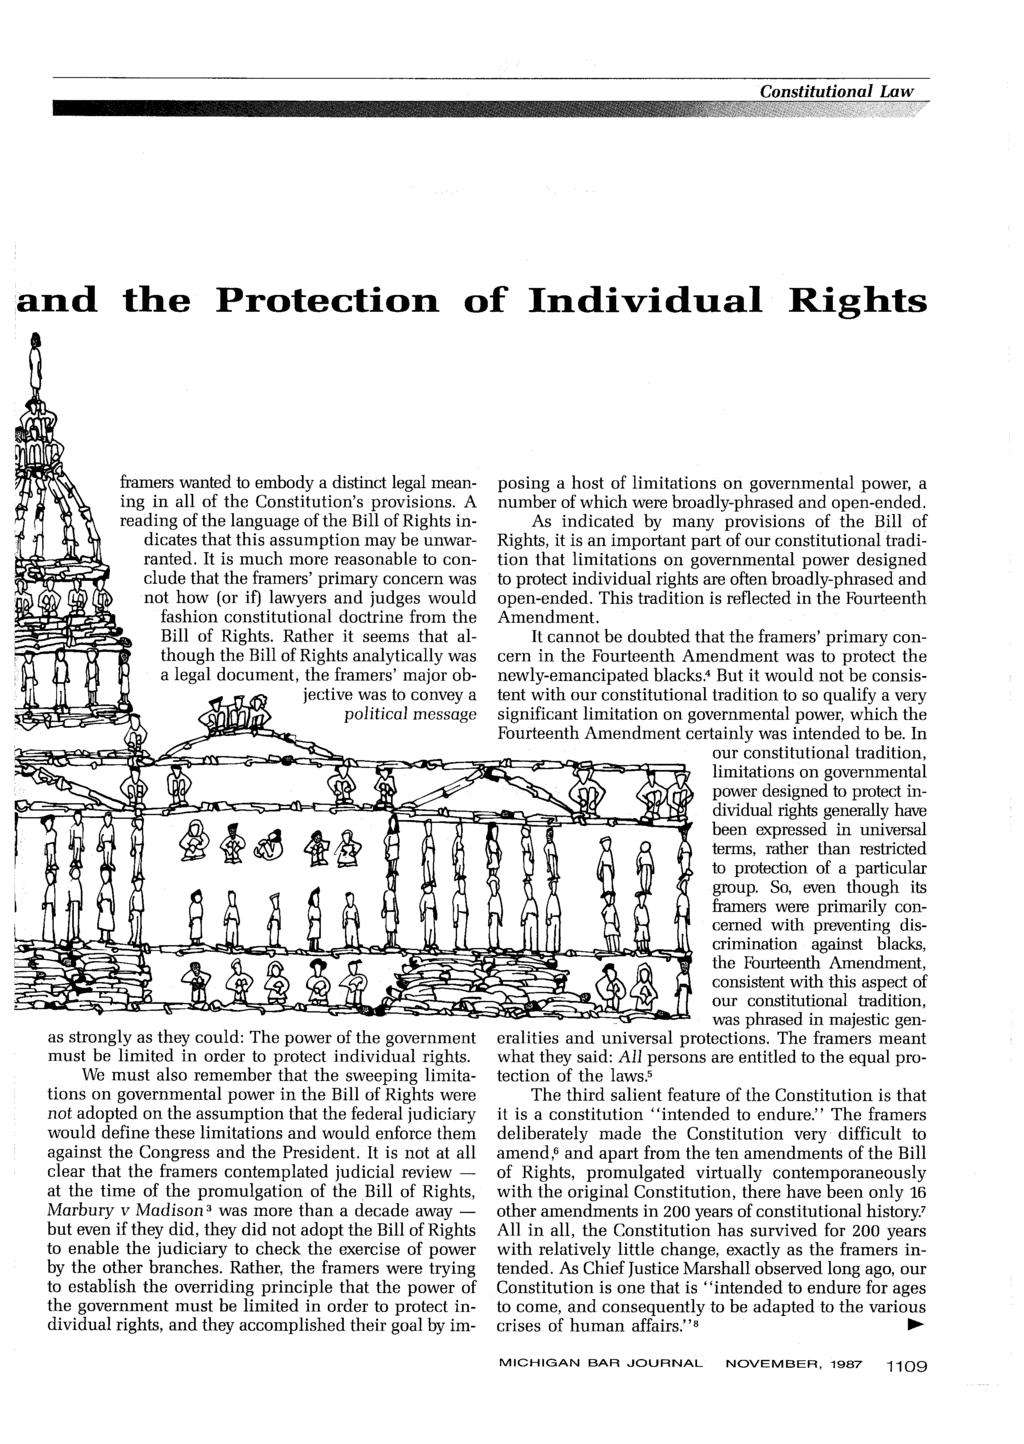 and the Protection of Individual Rights framers wanted to embody a distinct legal meaning in all of the Constitution's provisions.